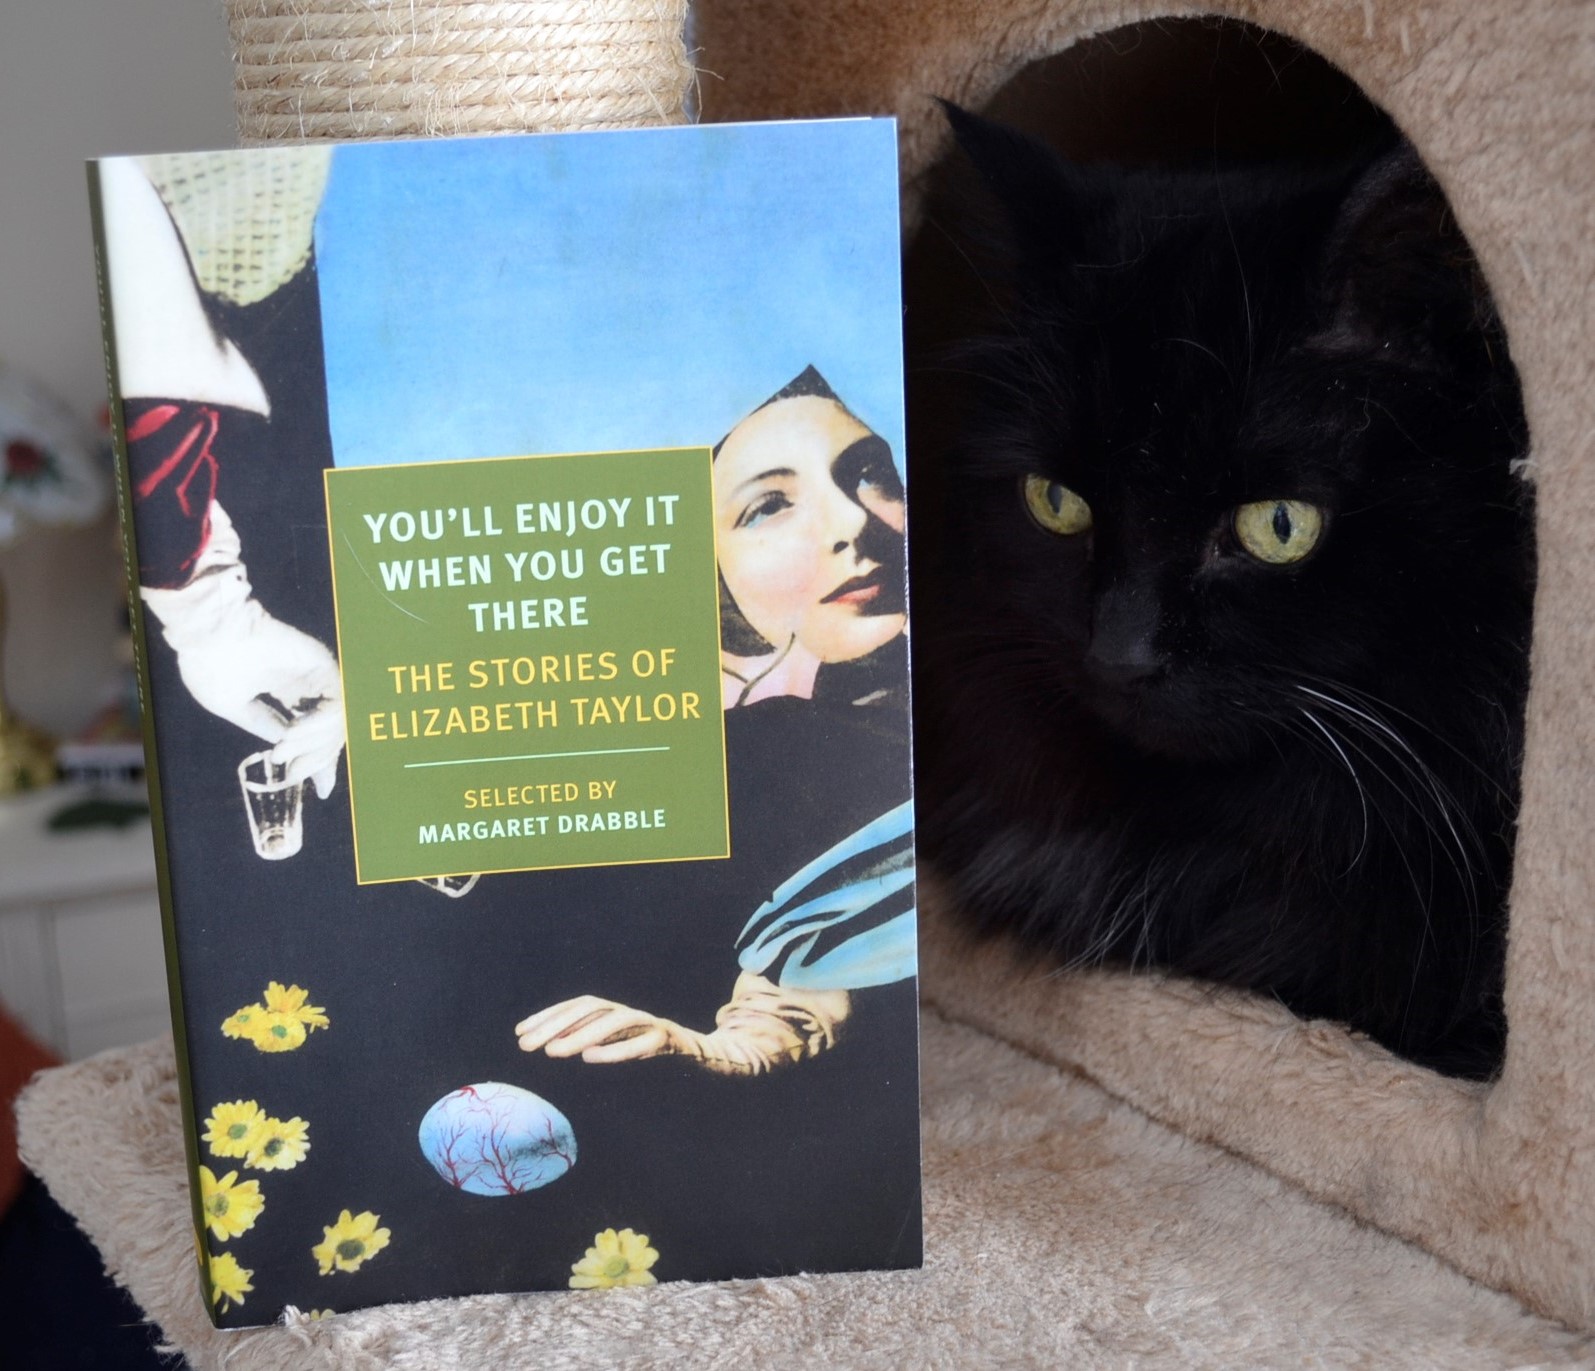 A black cat looks at a book: You'll Enjoy It When You Get There by Elizabeth Taylor.